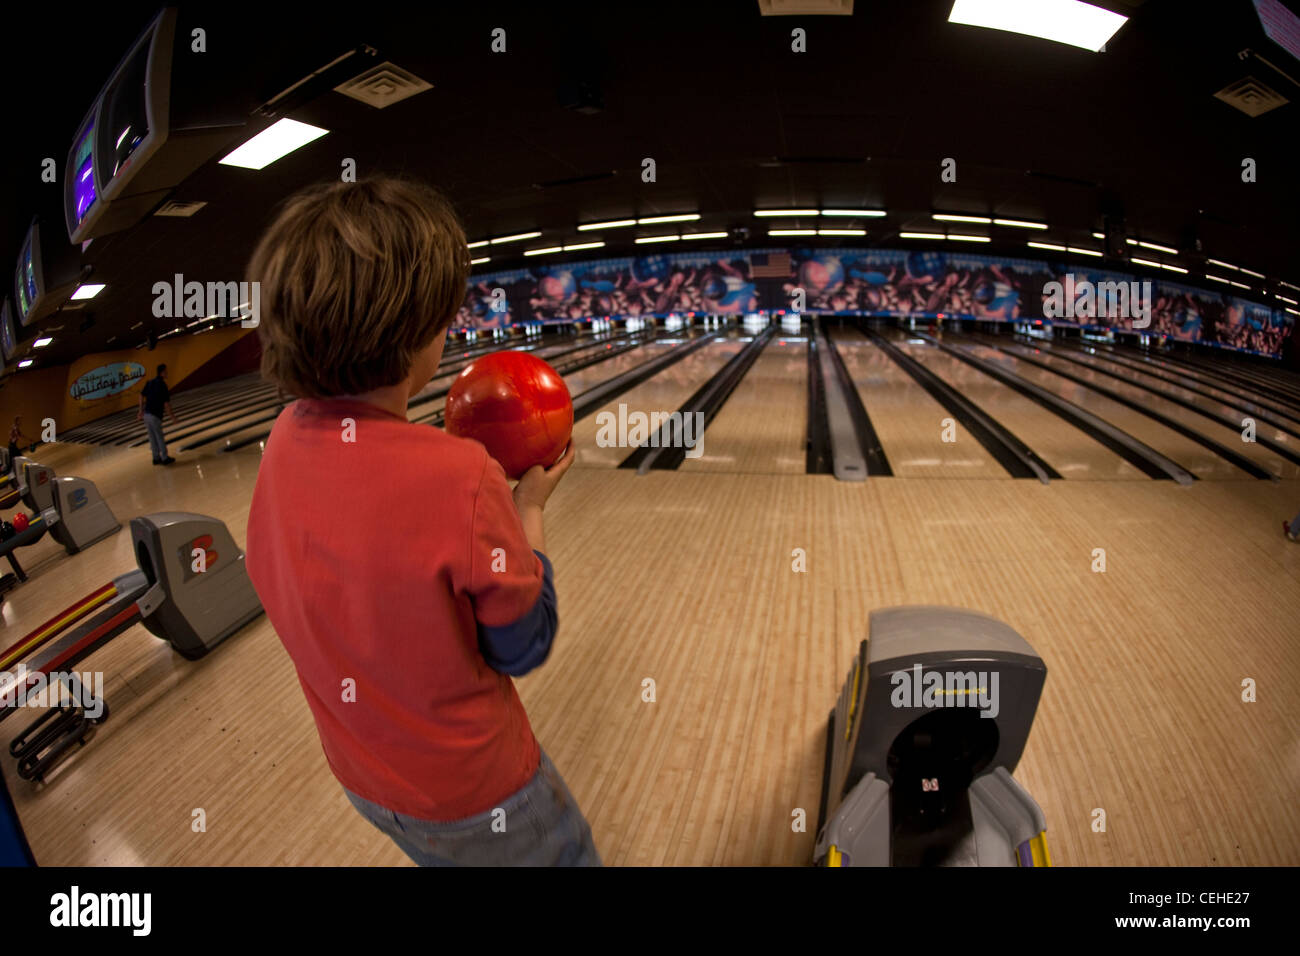 Ten year old bowling, bowling alley, United States. Stock Photo